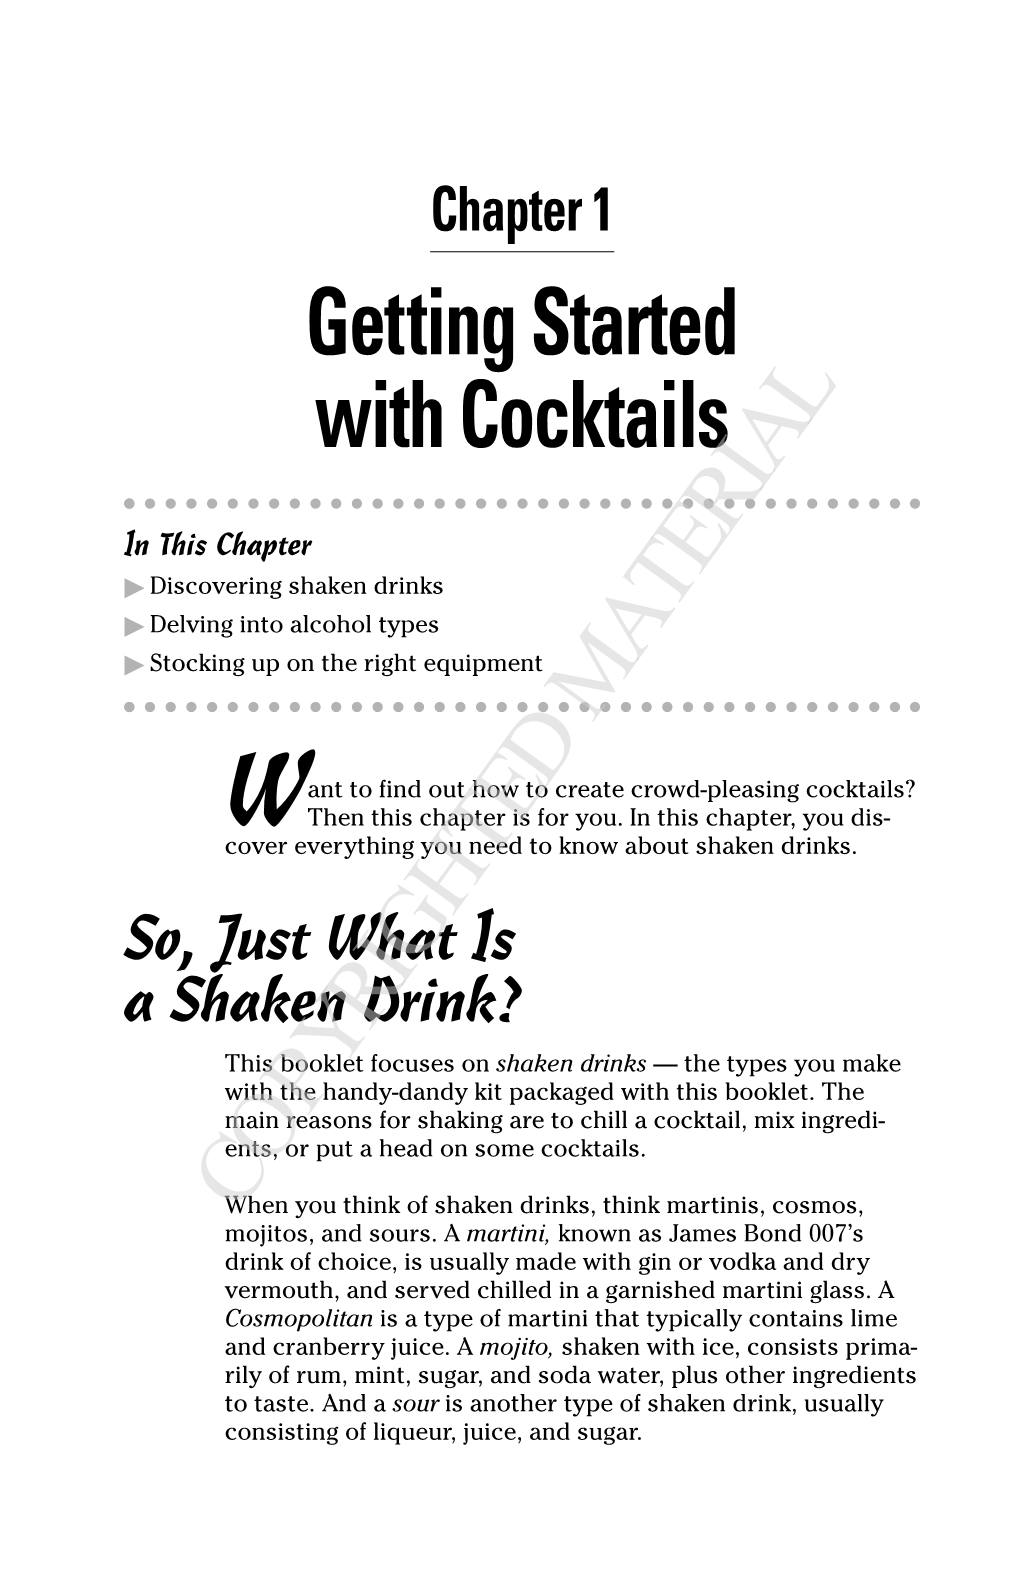 Getting Started with Cocktails